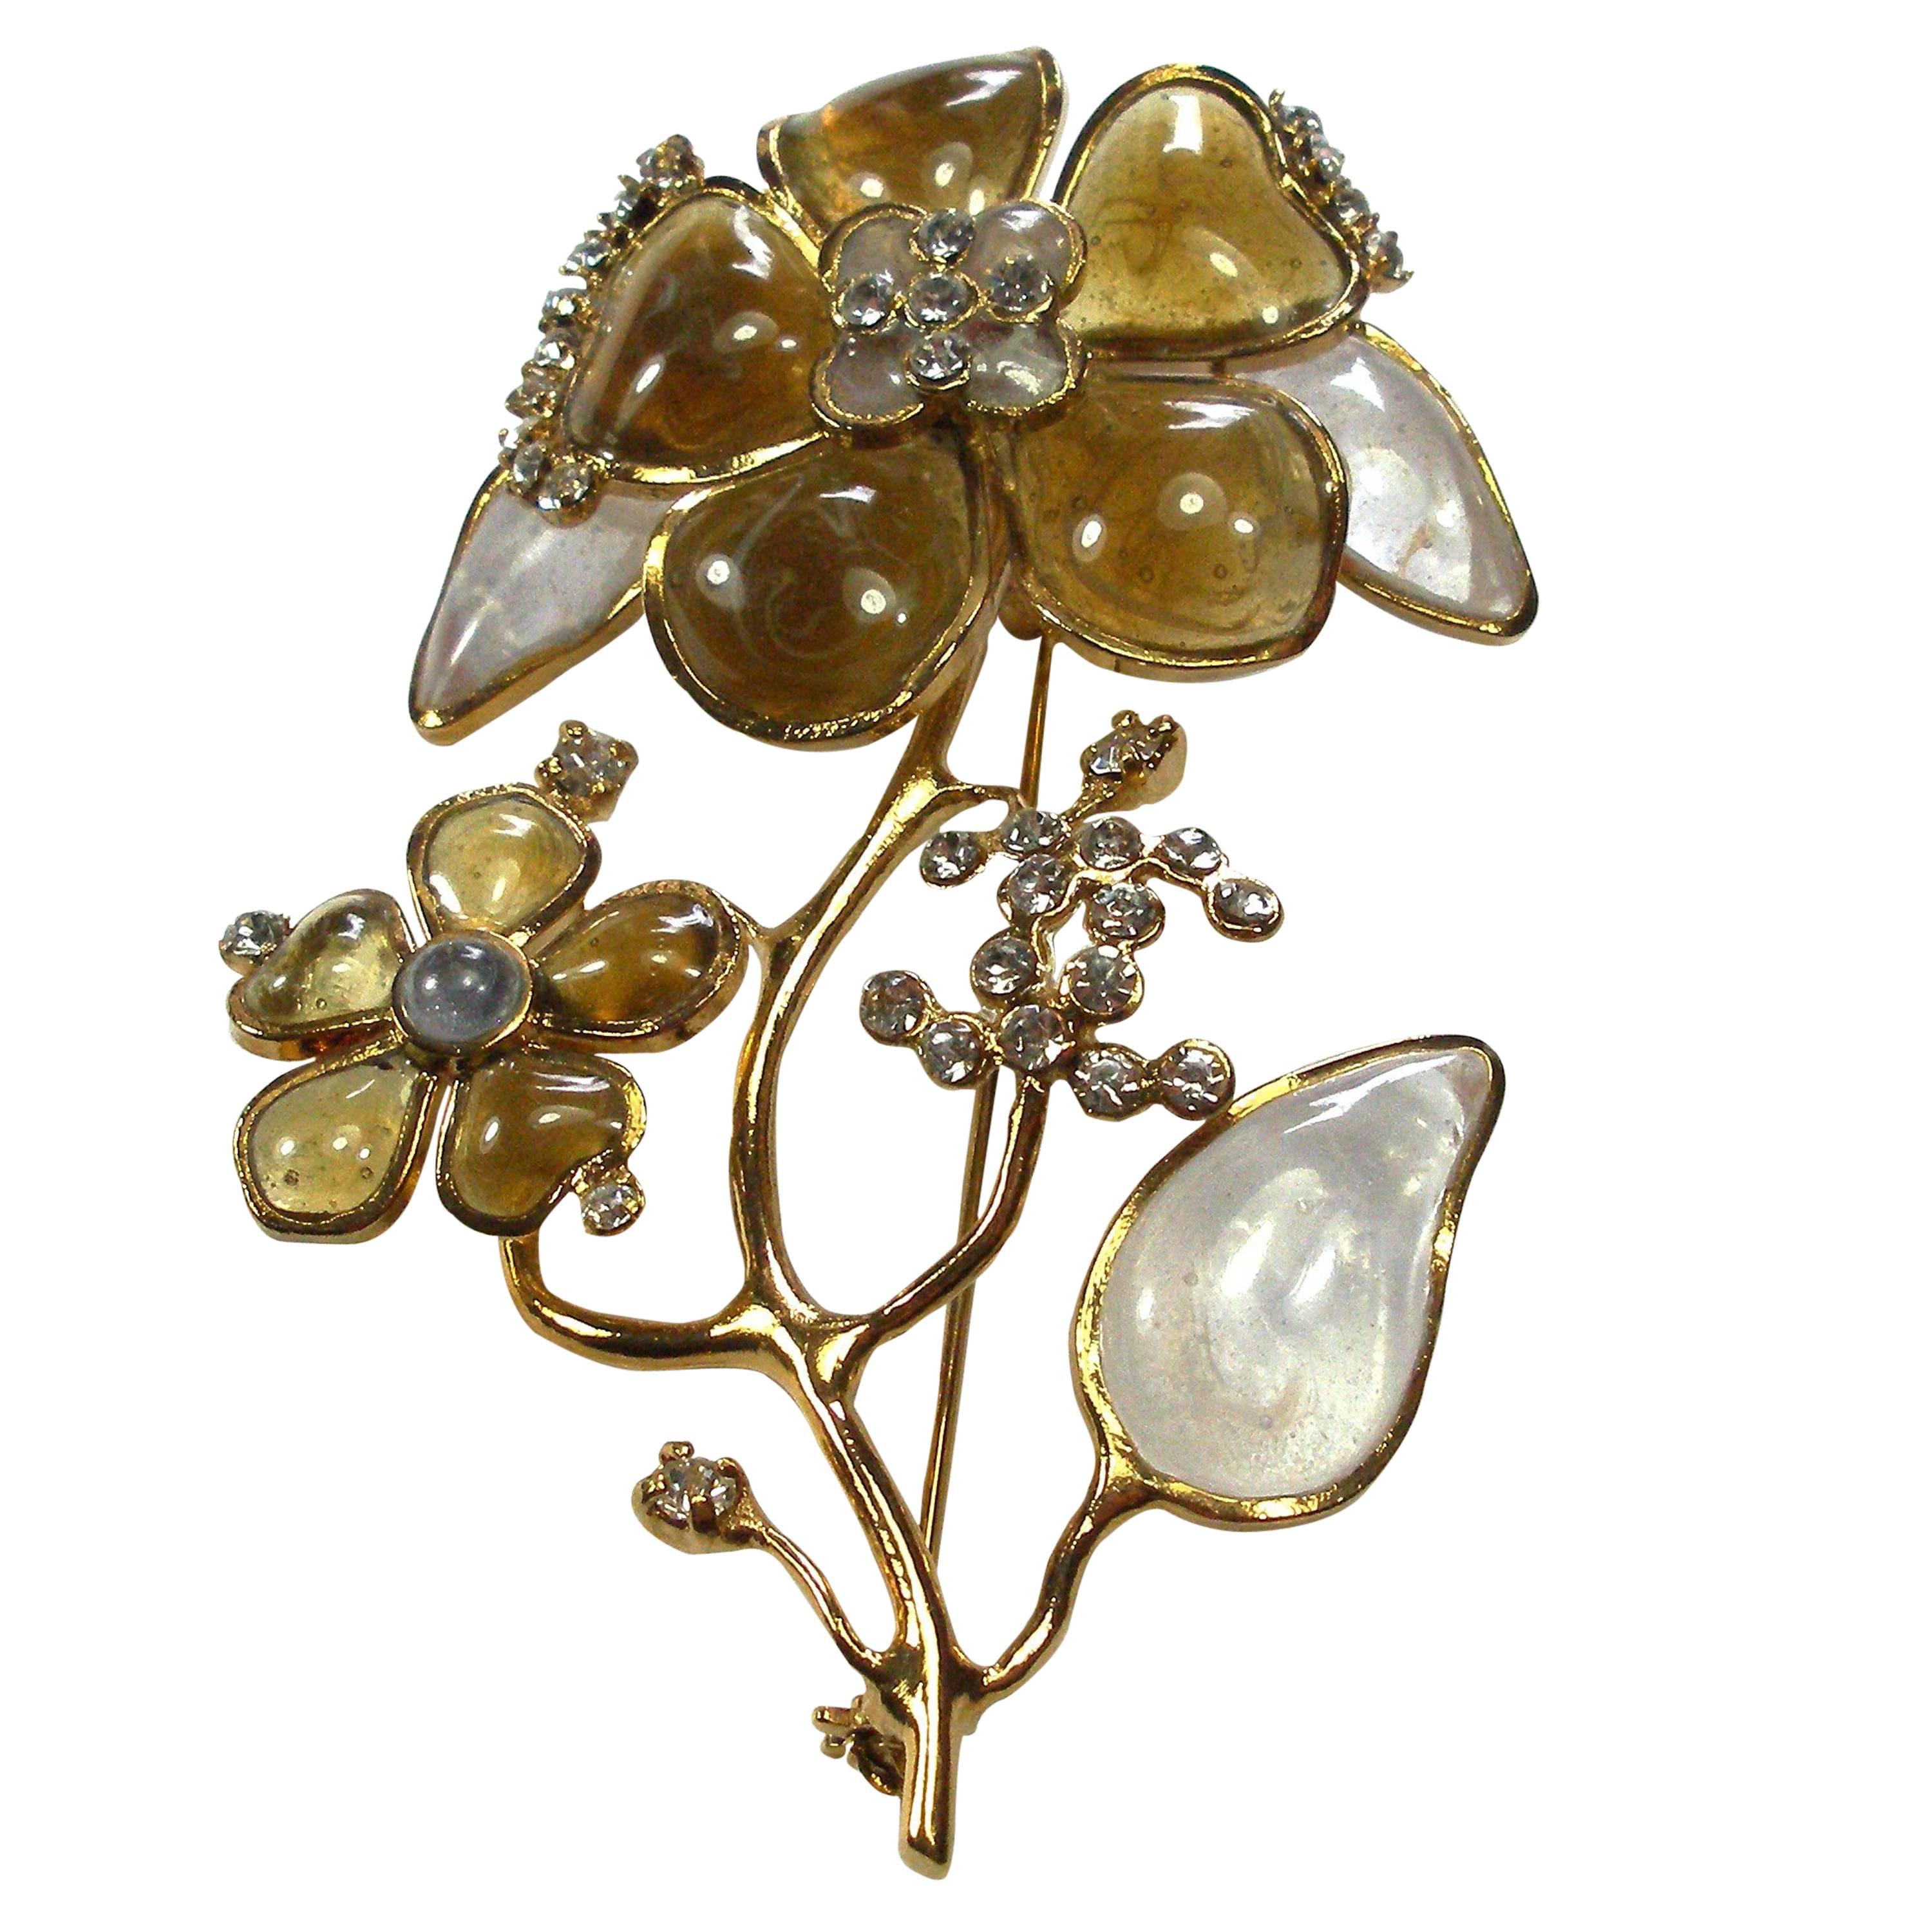 Sold at Auction: A Chanel Gripoix star brooch in Byzantine style